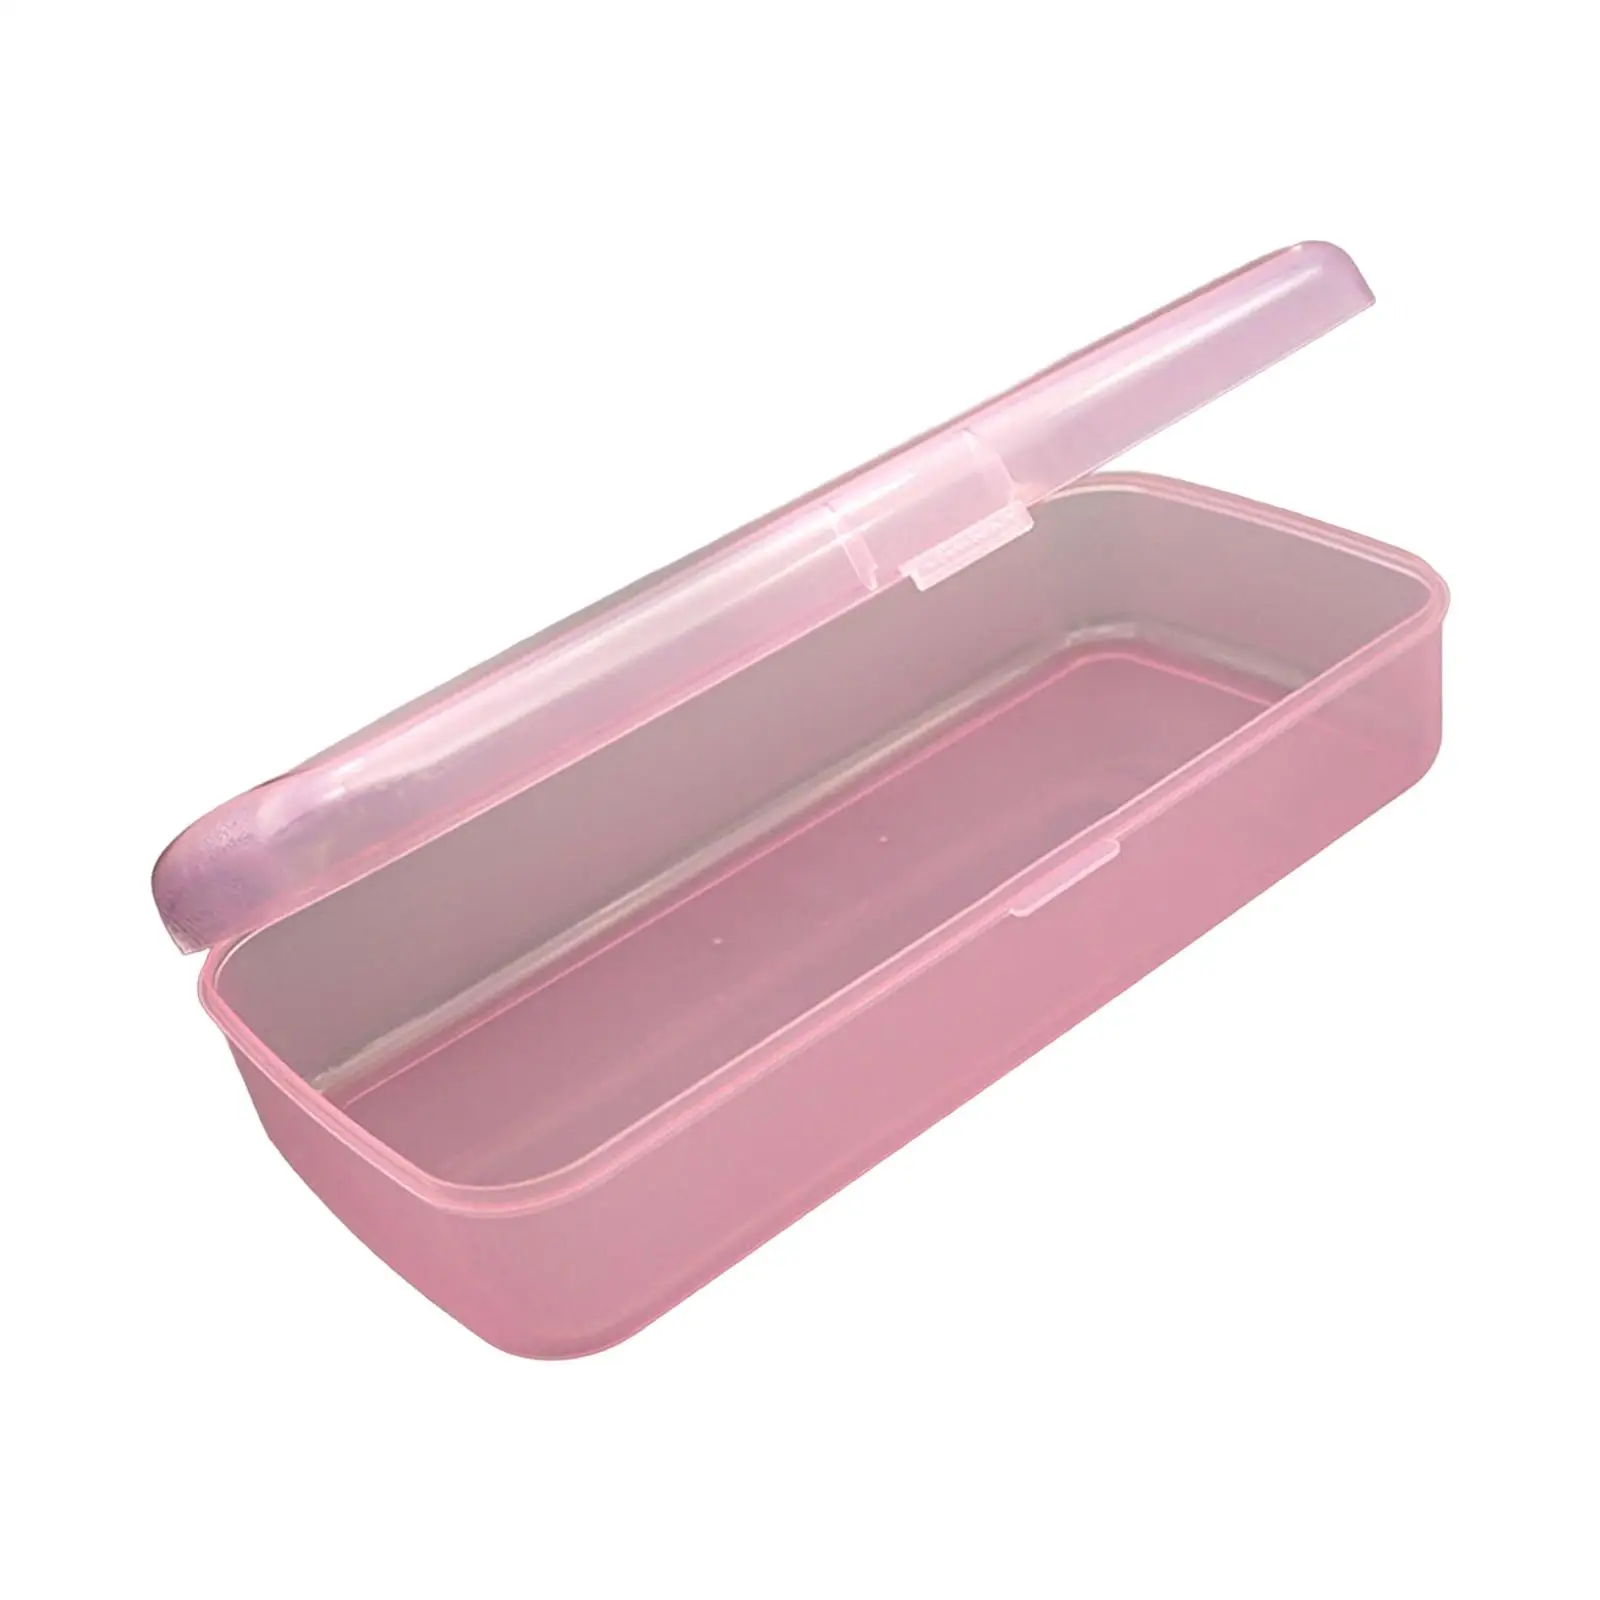 Nail Art Tool Storage Box Organizing Clear Personal Empty Container Manicure Tool Box Organizer for Beads Polishing Strip